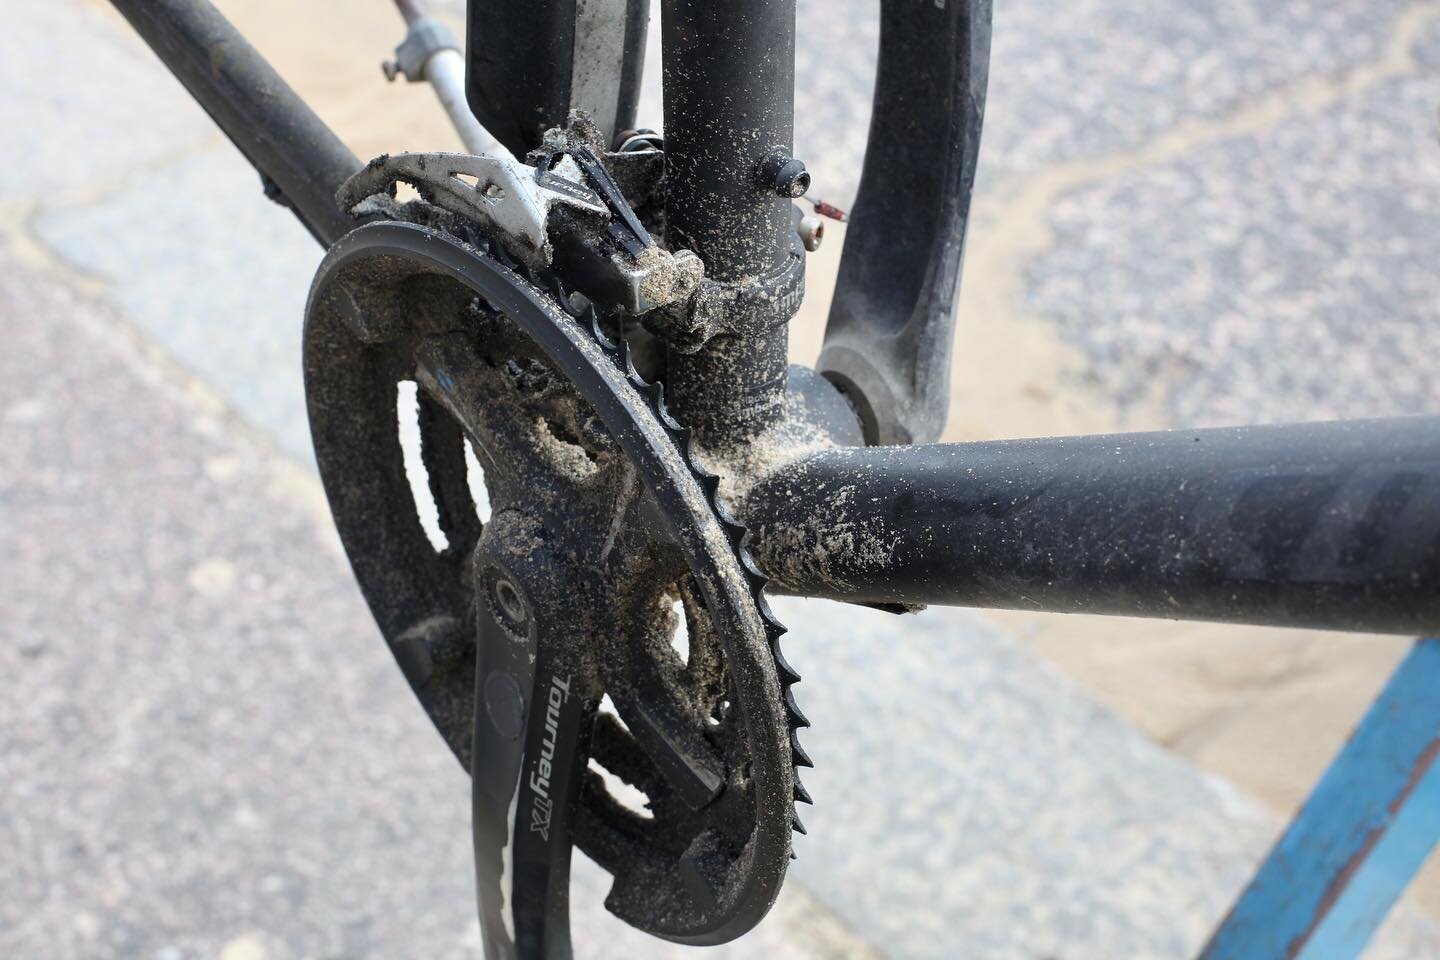 We&rsquo;ve had a lot of wind, rain and sand kicking about but now is the time to get your bike summer ready with a service to keep those parts moving. Drop us a message to book in for same day servicing. 
.
#bournemouth #bournemouthbeach #beach #cyc